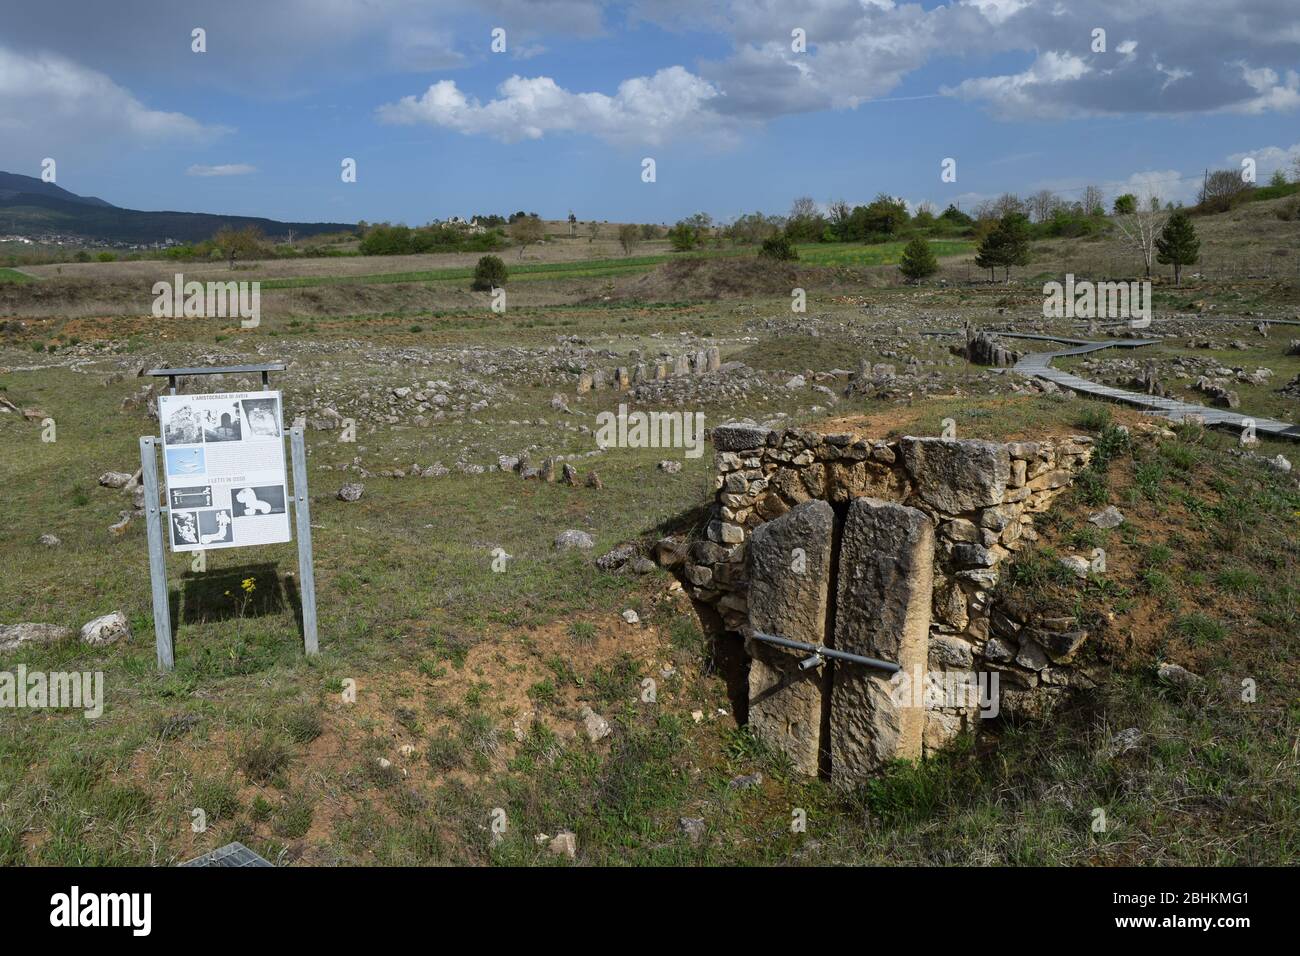  An image of a large, grassy field containing two large stone structures with stone lintels, one being a doorway, and the other having a large stone slab leaning against it, with a small sign in the foreground describing the ruins in Italian.